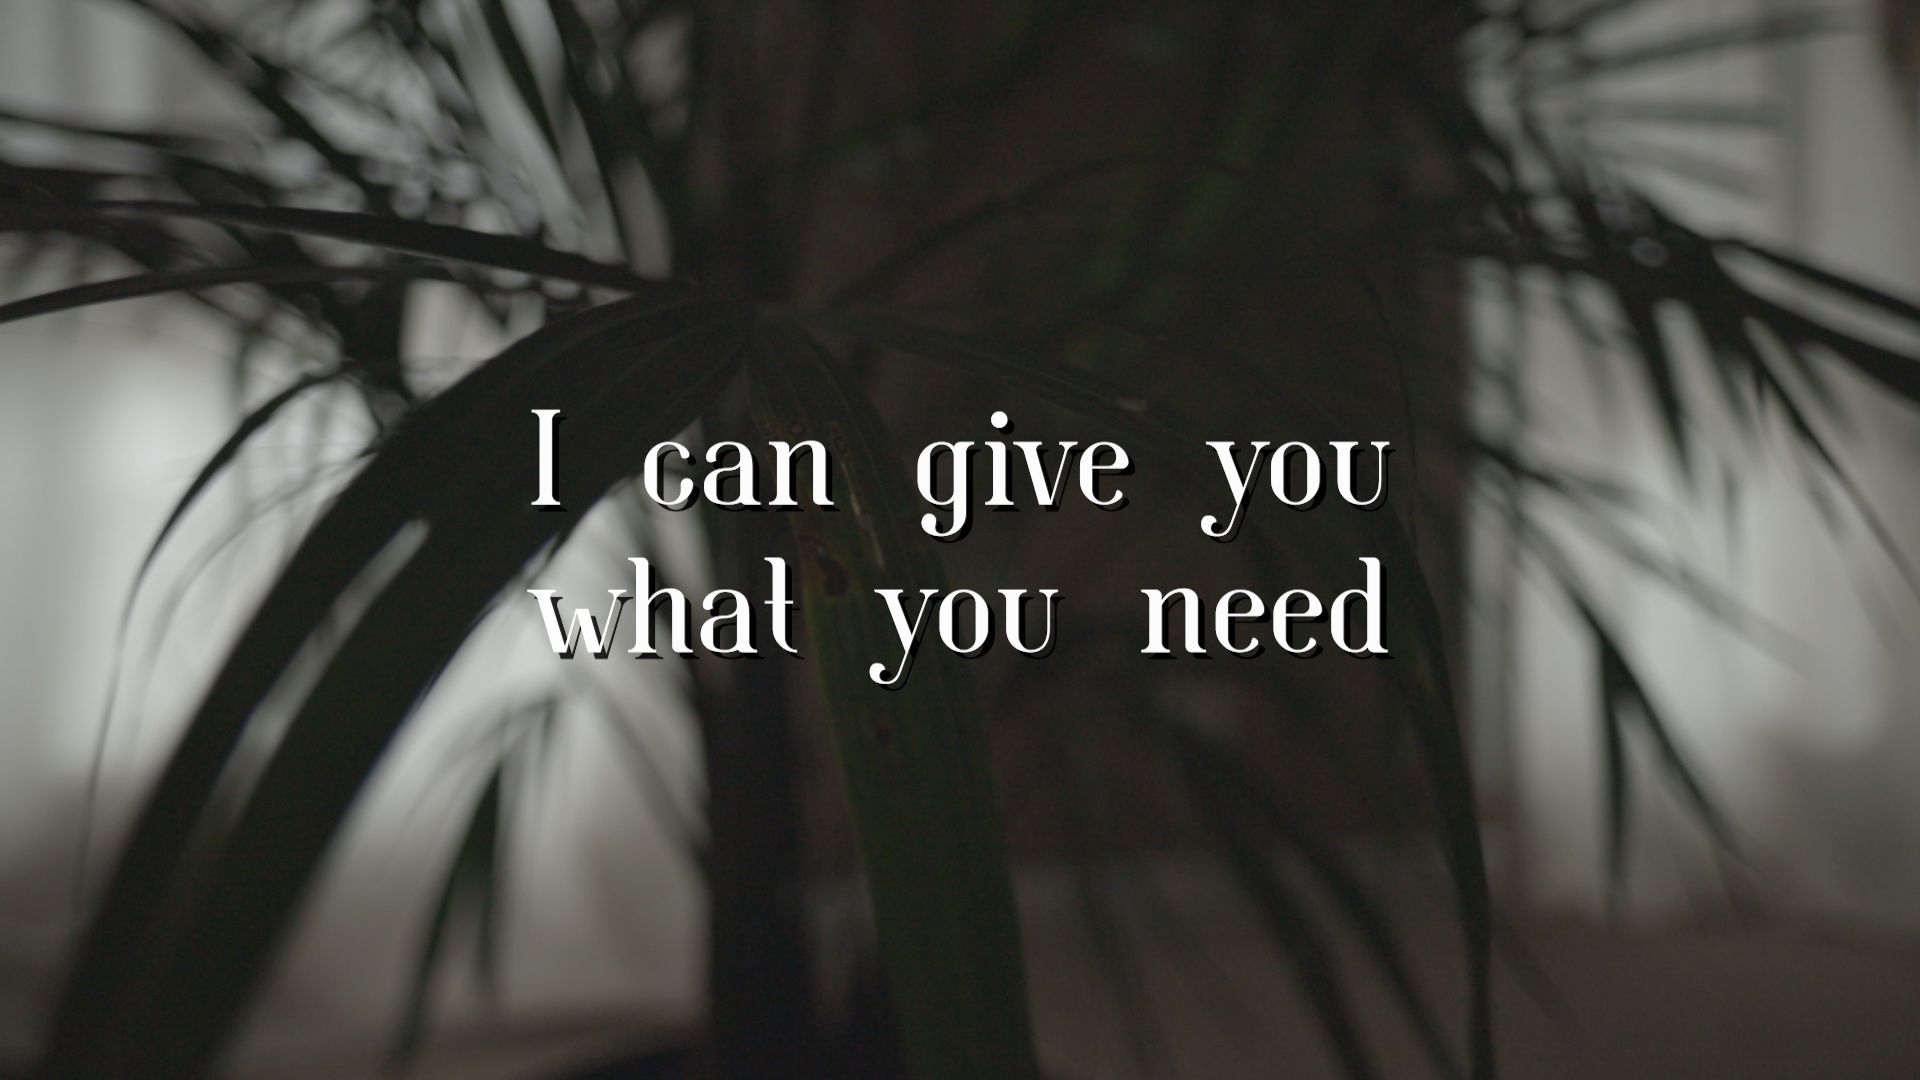 I can give you what you need